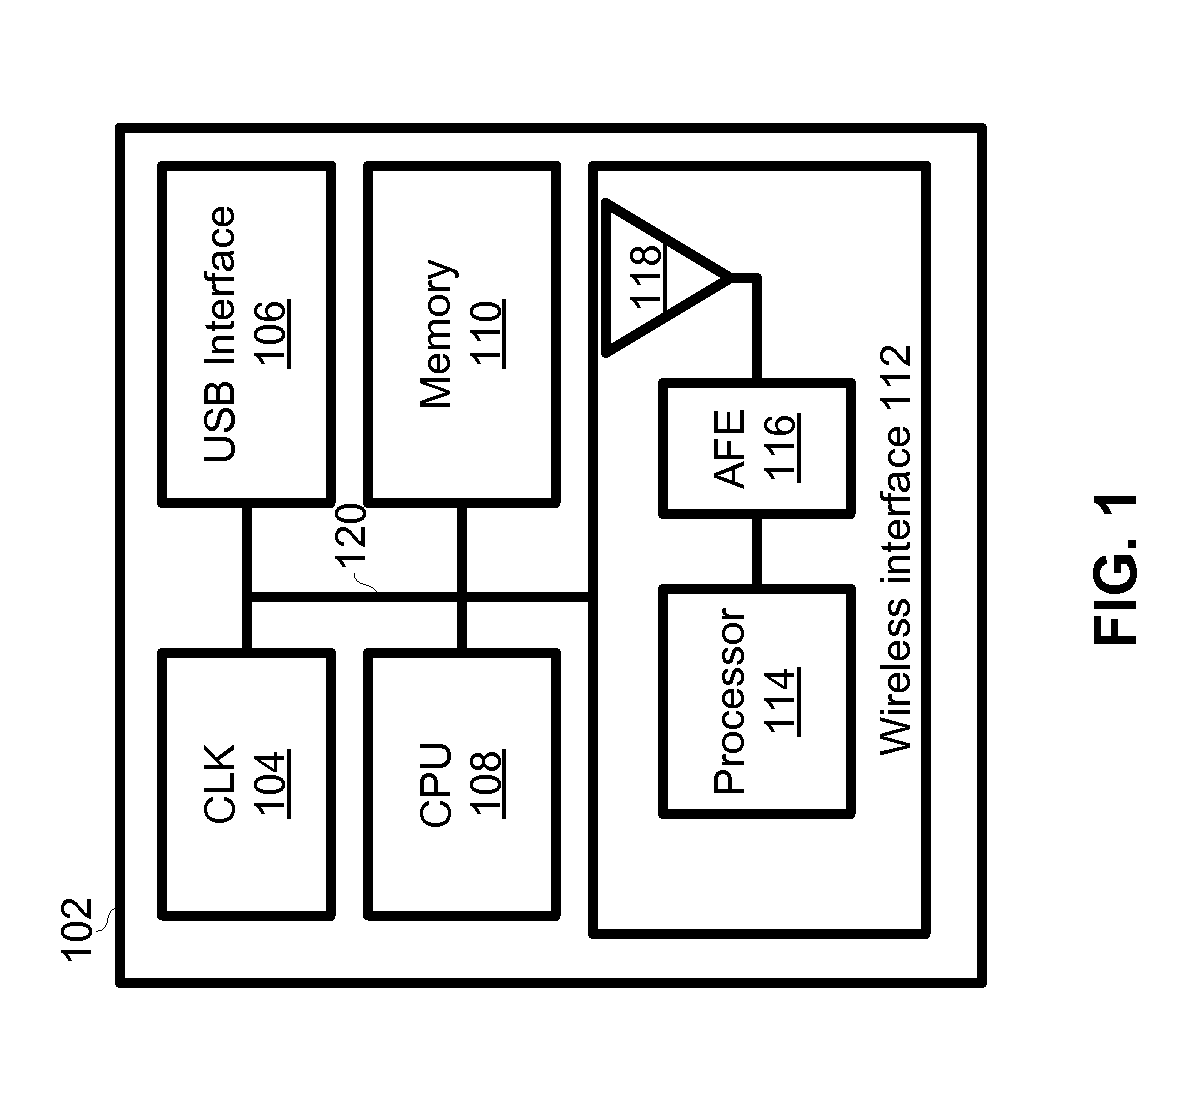 Method and apparatus for plug and play, networkable iso 18000-7 connectivity